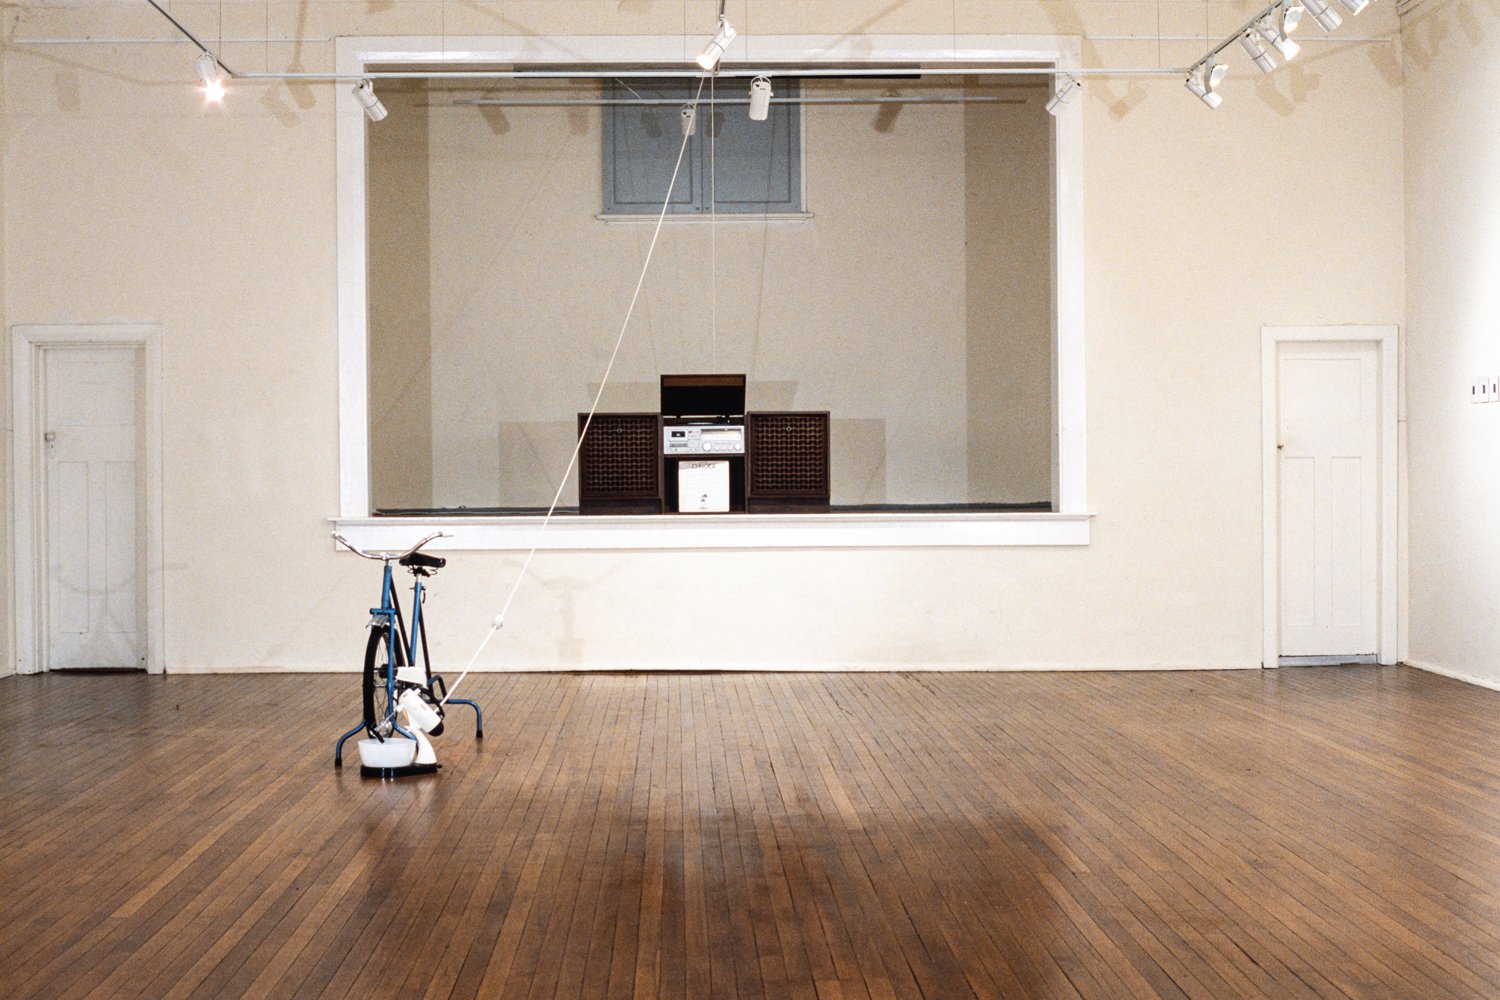 Space Age 1999 (Installation view)